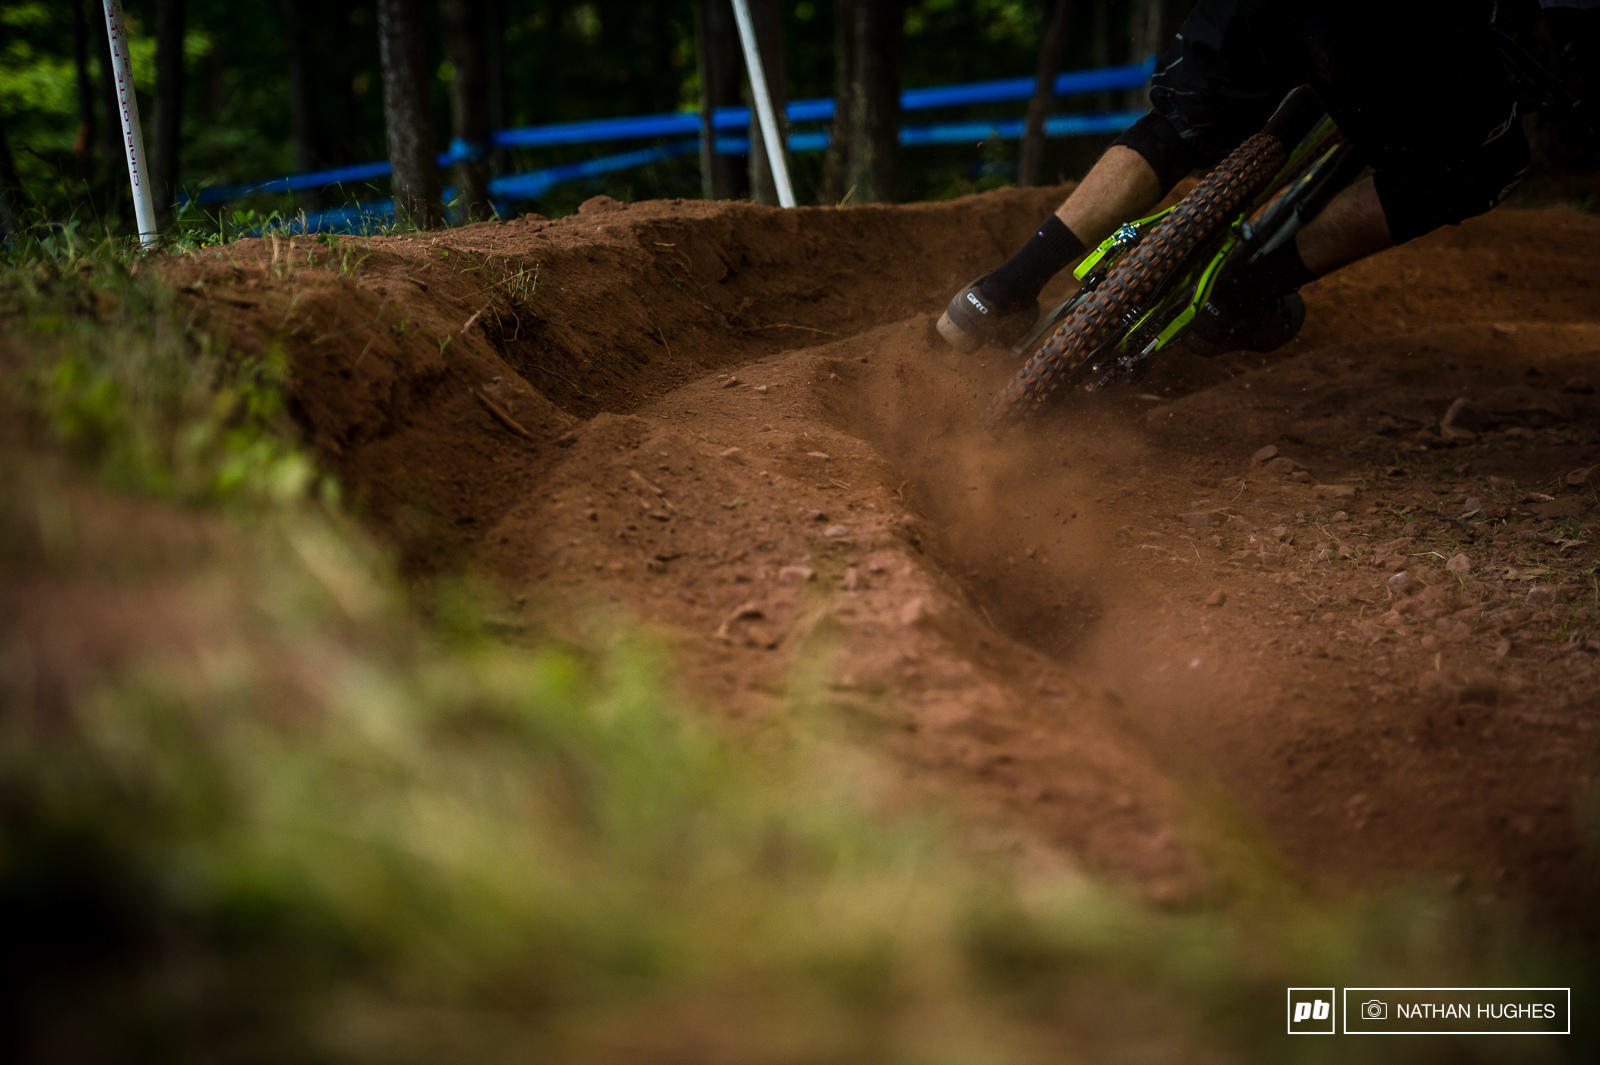 The Windham dust gets about another inch deeper every lap. Expect some mighty explosions with any small deviations from the line for finals...